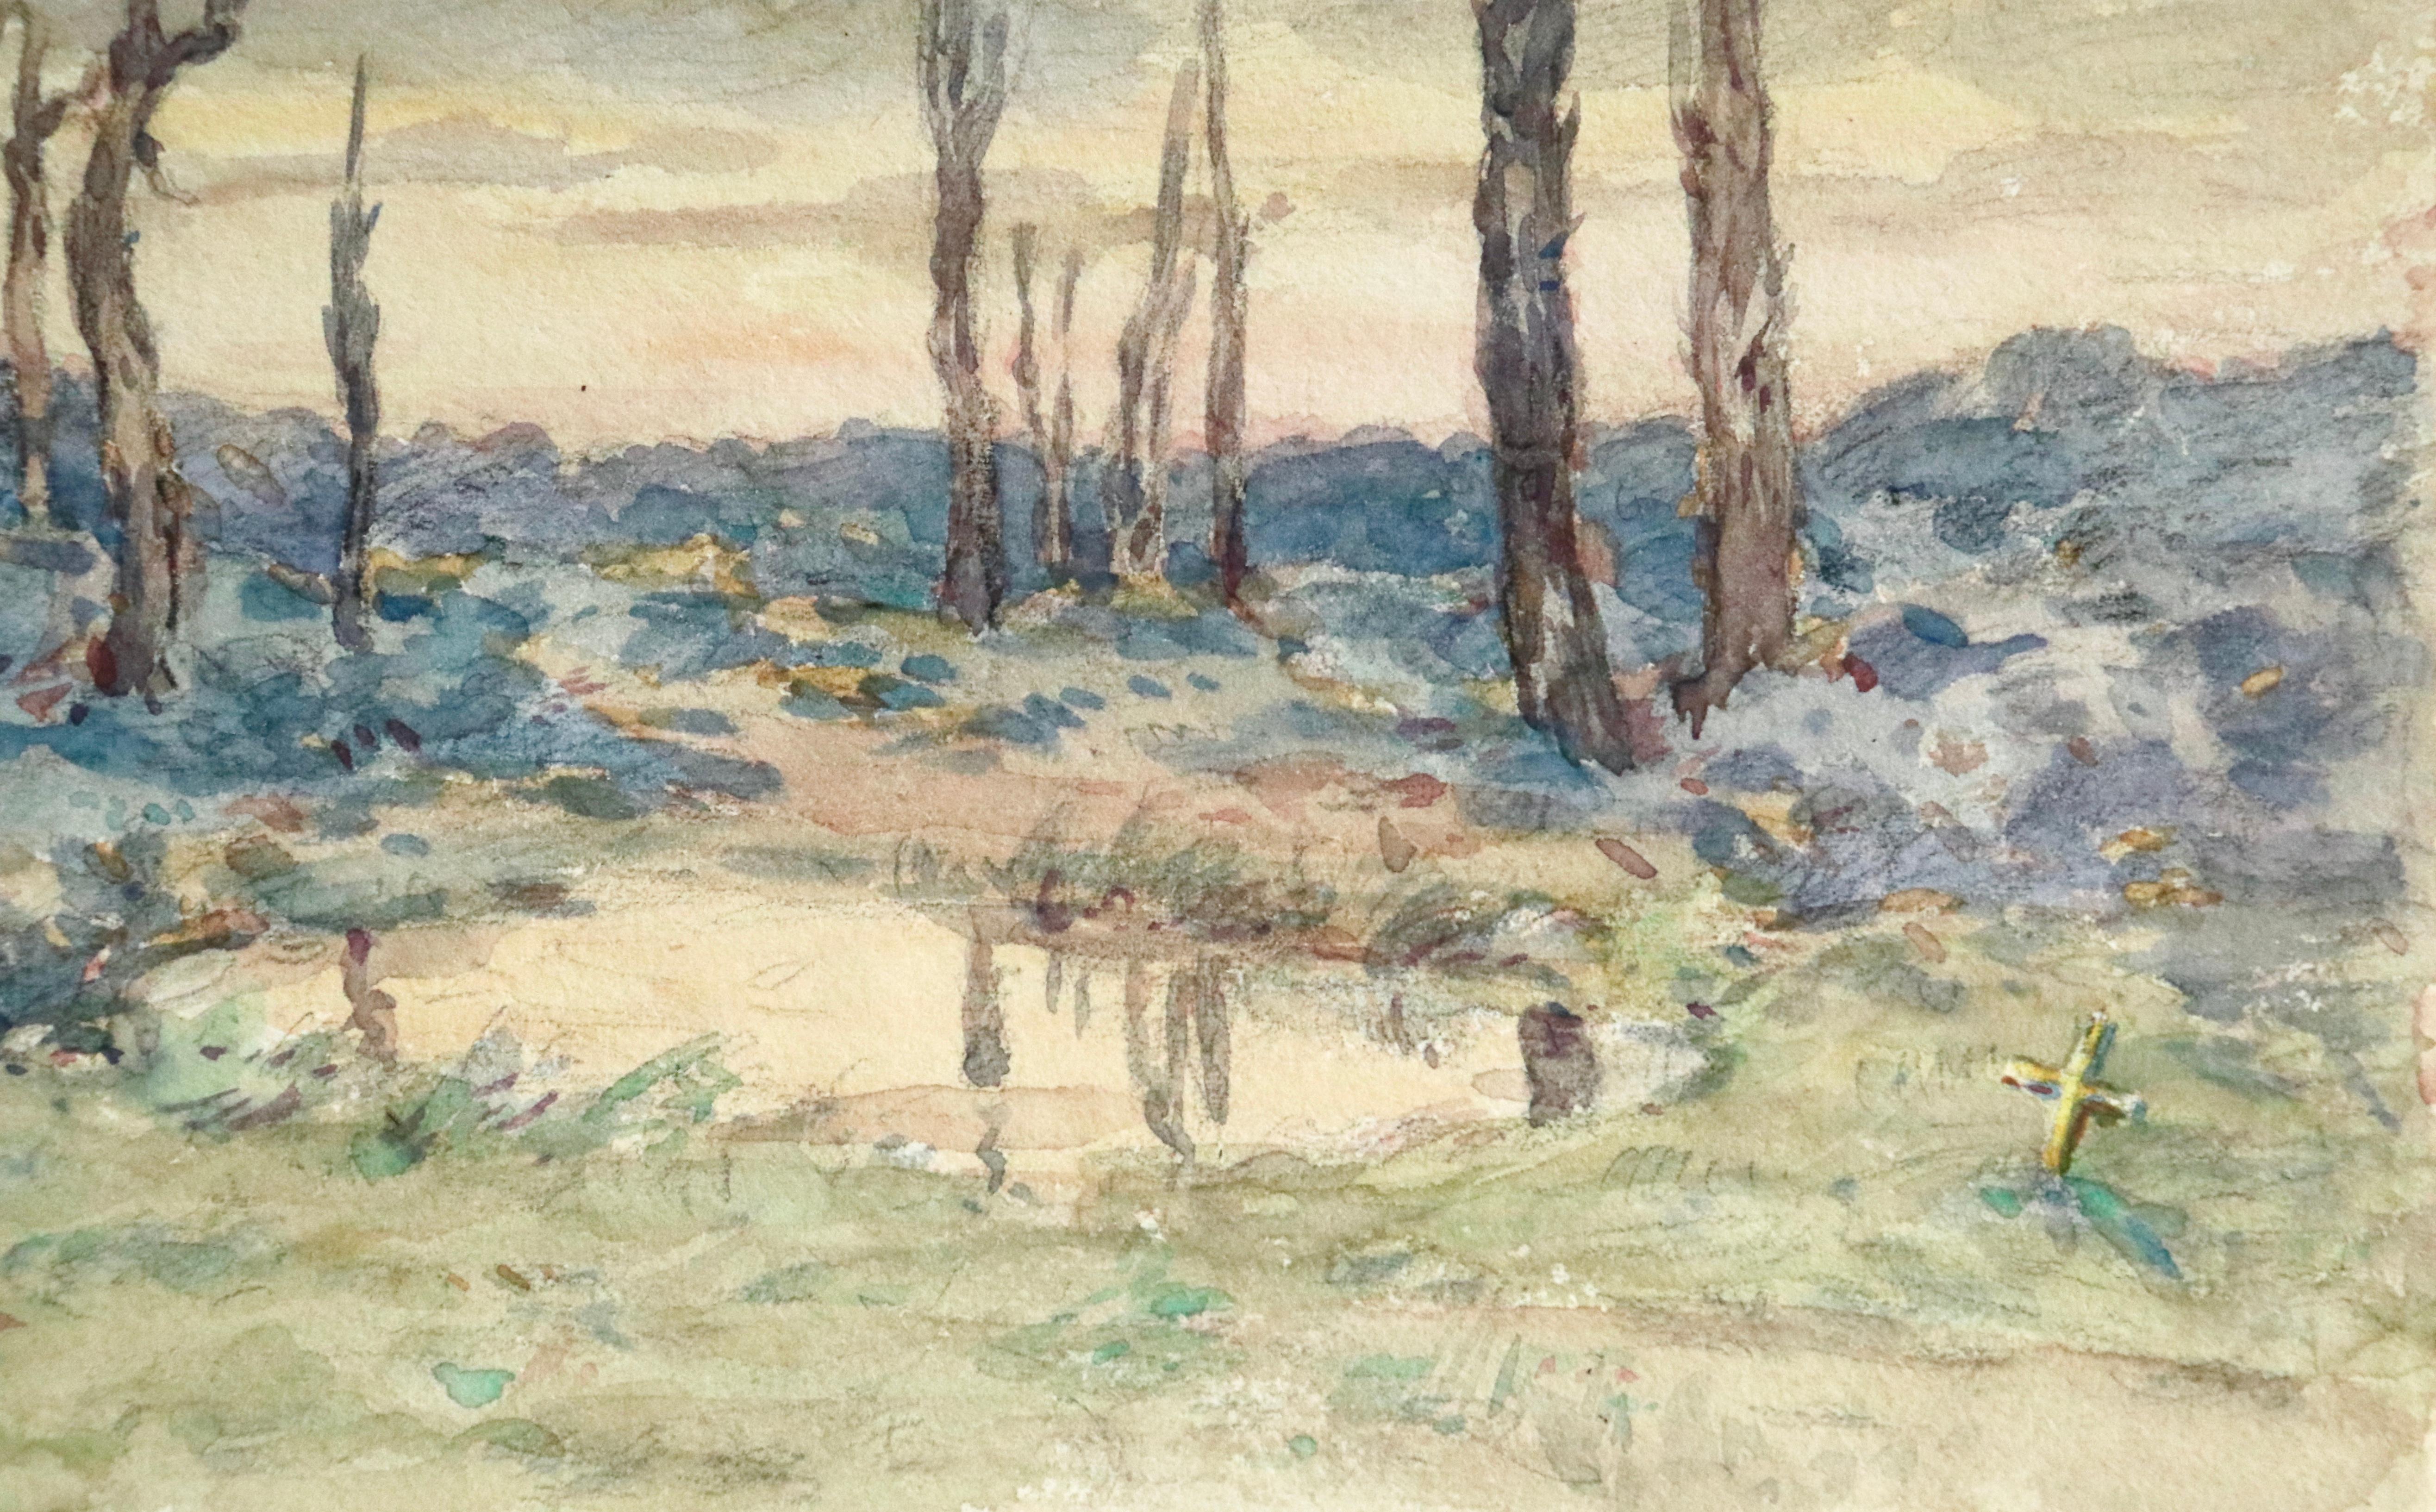 Watercolour on paper by Henri Duhem depicting Ypres - also known as Leper - in Belgium, which was the centre of the Battles of Ypres between Germany and Allied forces in World War I. Signed, titled and dated 1922 lower left. This painting is not